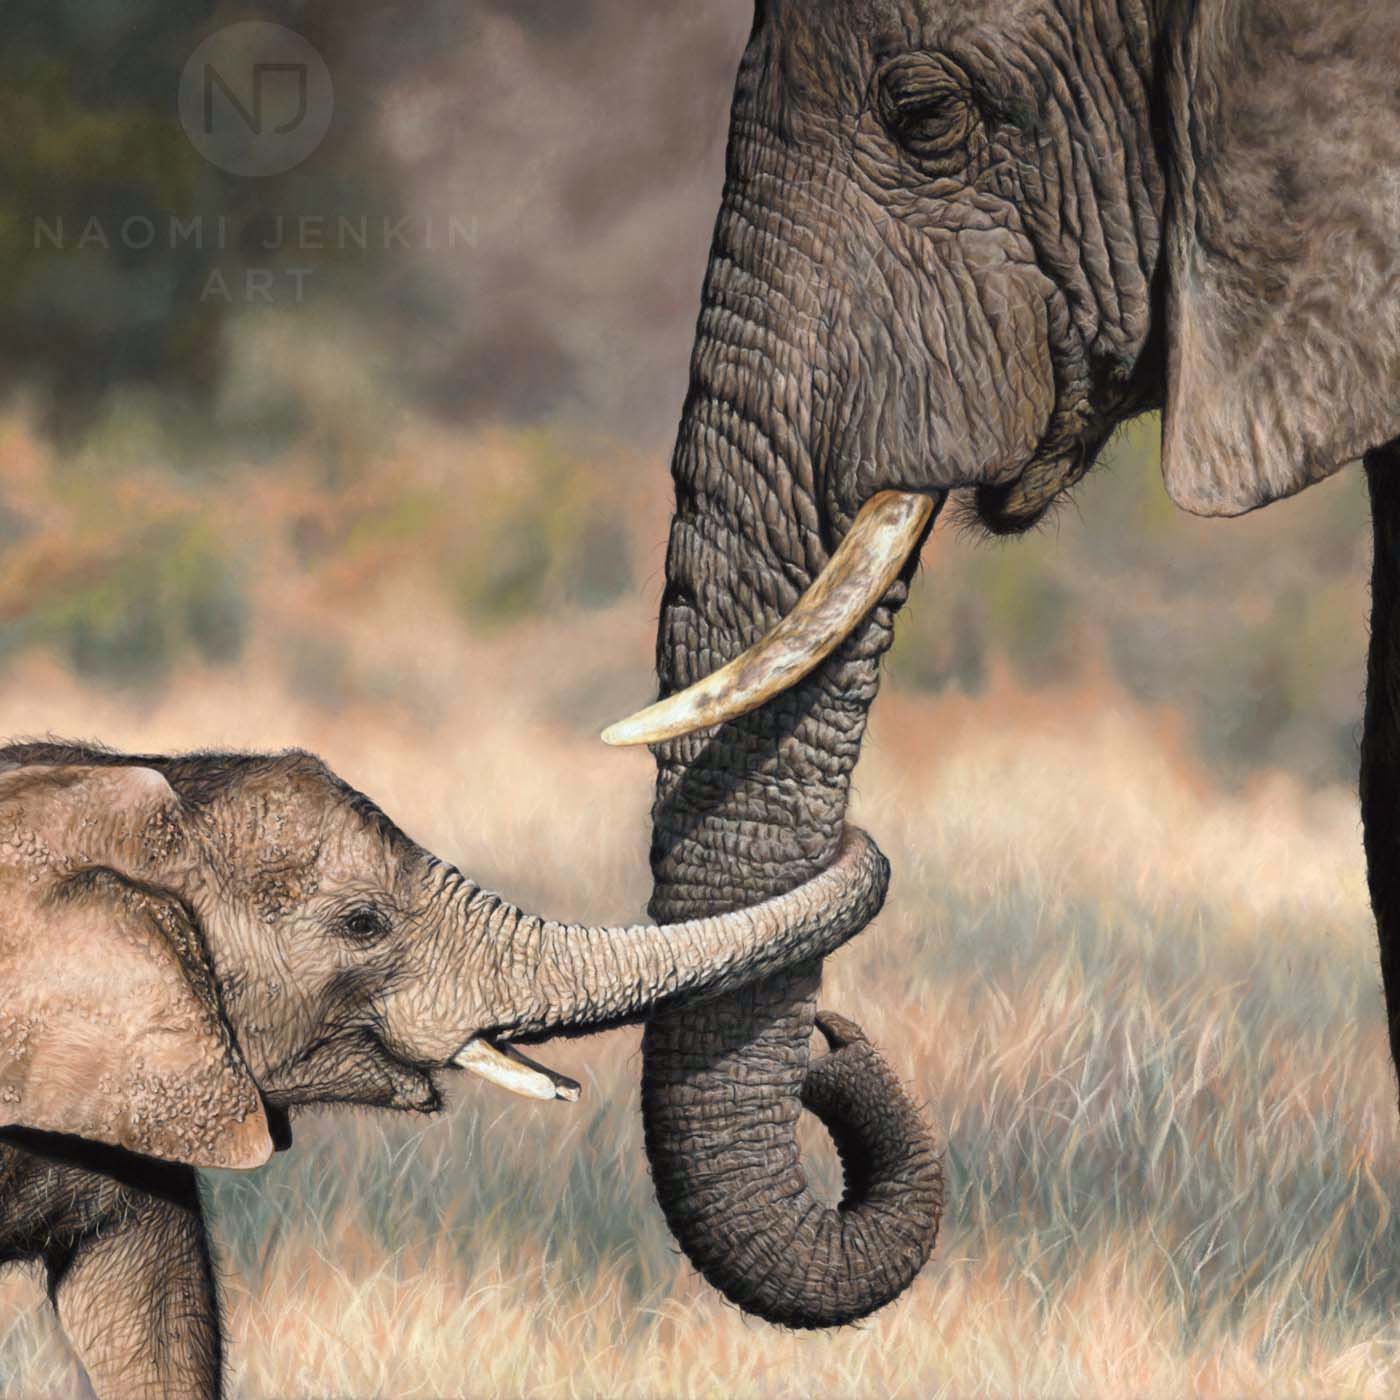 Elephant painting hand drawn in pastels by wildlife artist Naomi Jenkin.